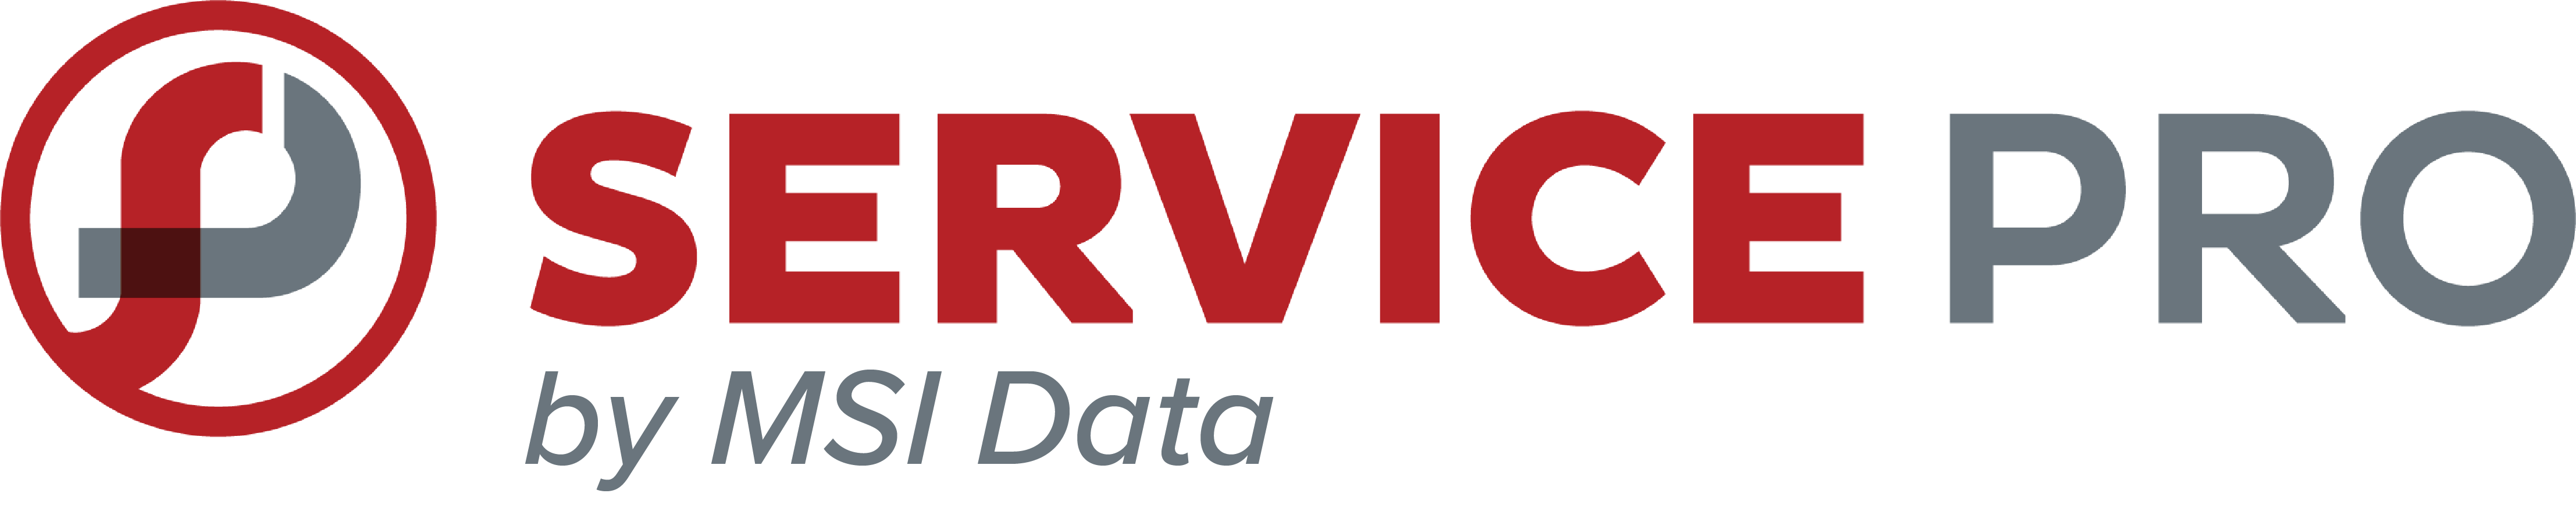 Service Pro by MSI Data logo (color)